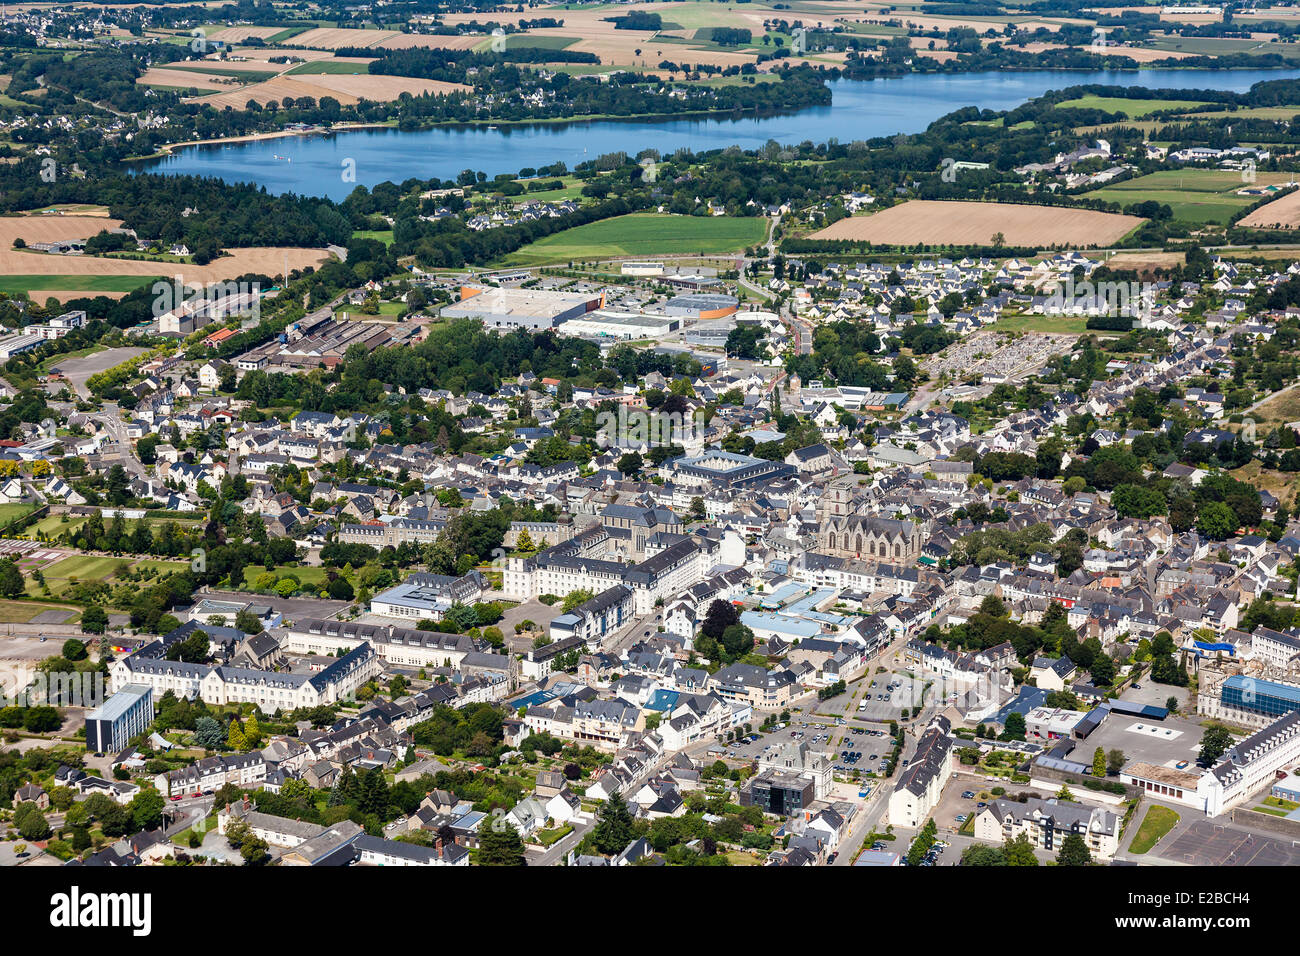 France, Morbihan, Ploermel, Lac au Duc in the background (aerial view) Stock Photo